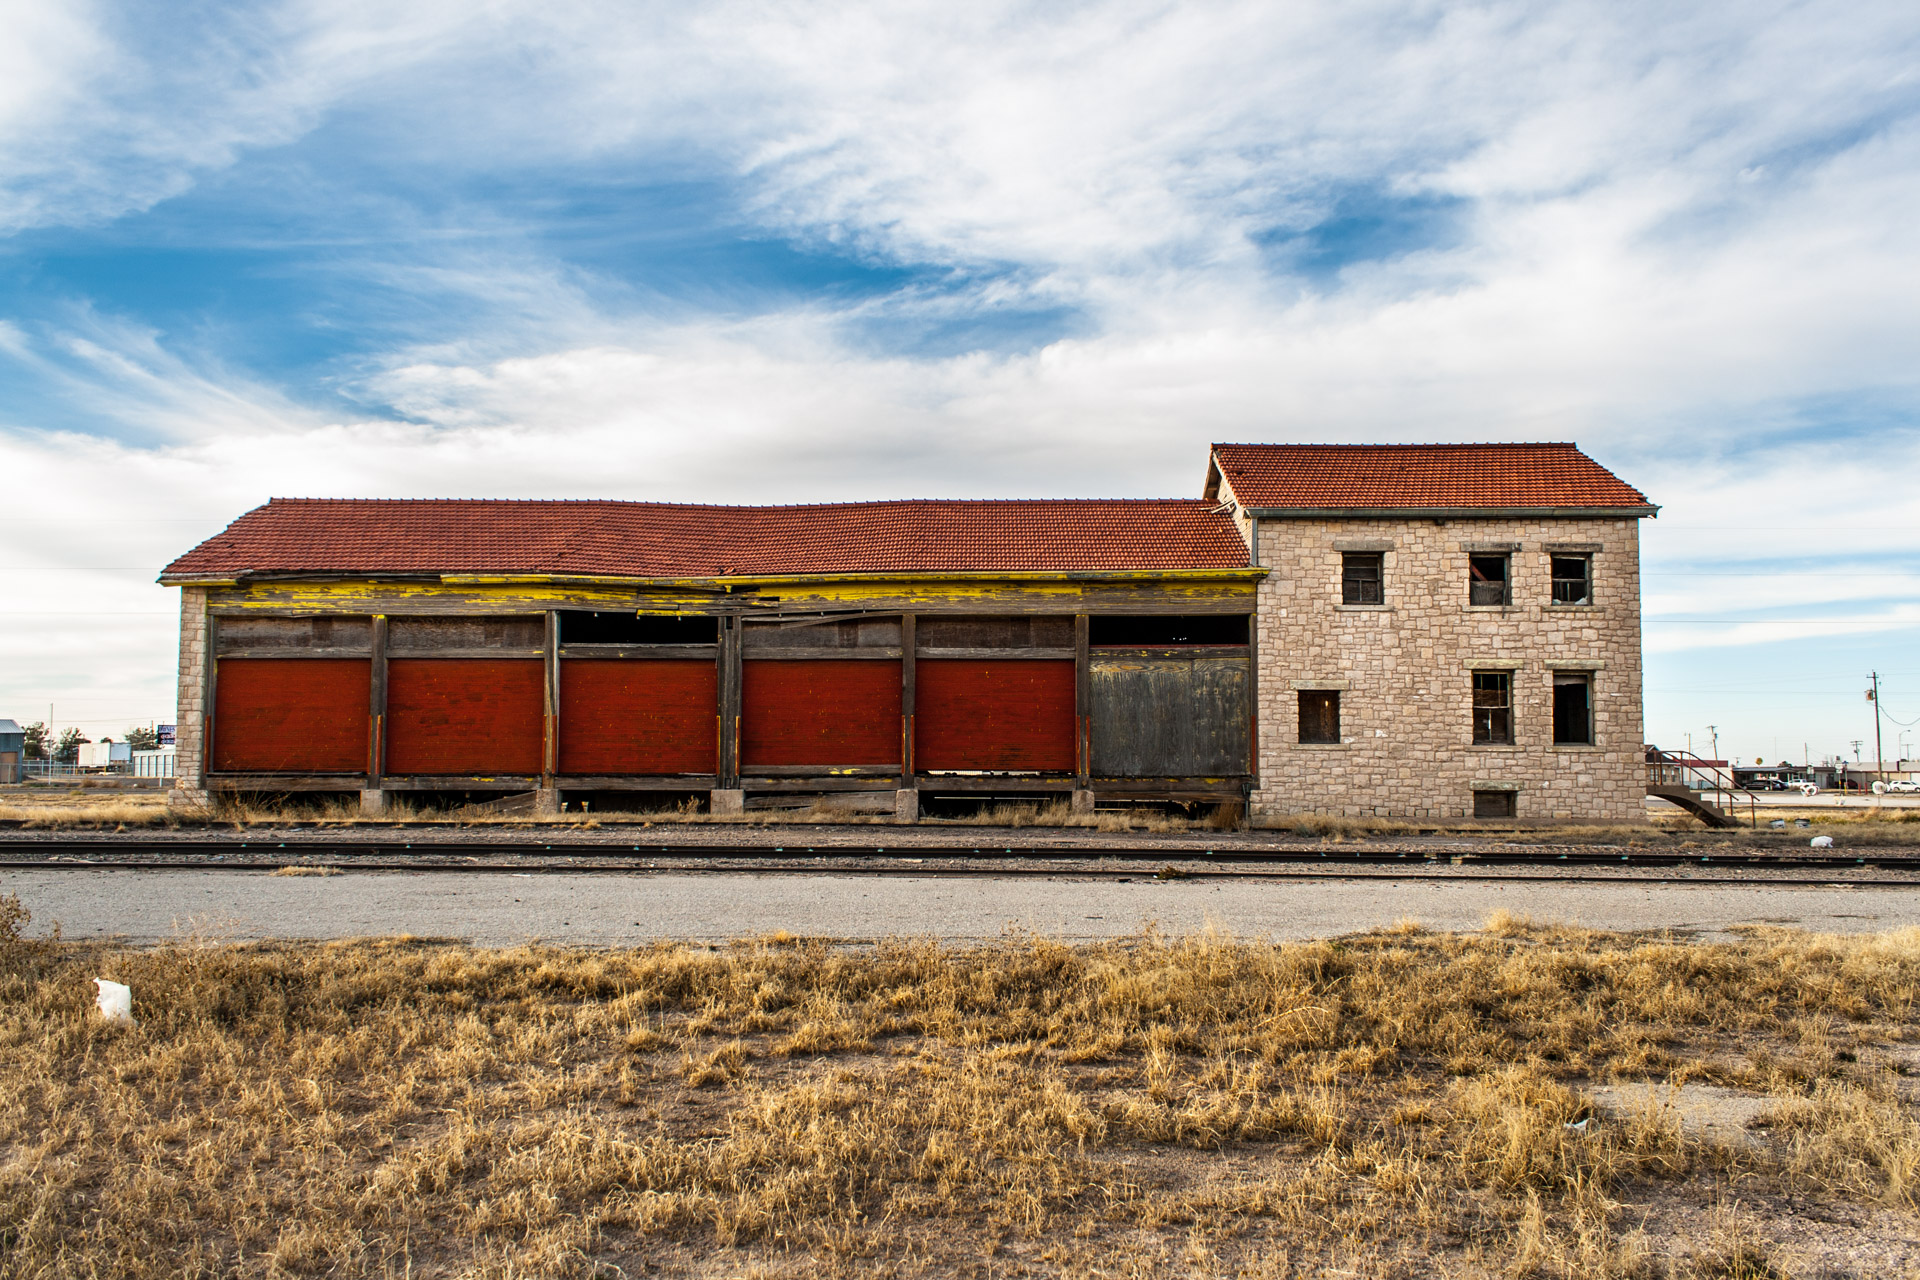 Fort Stockton, Texas - A Colorful Train Depot